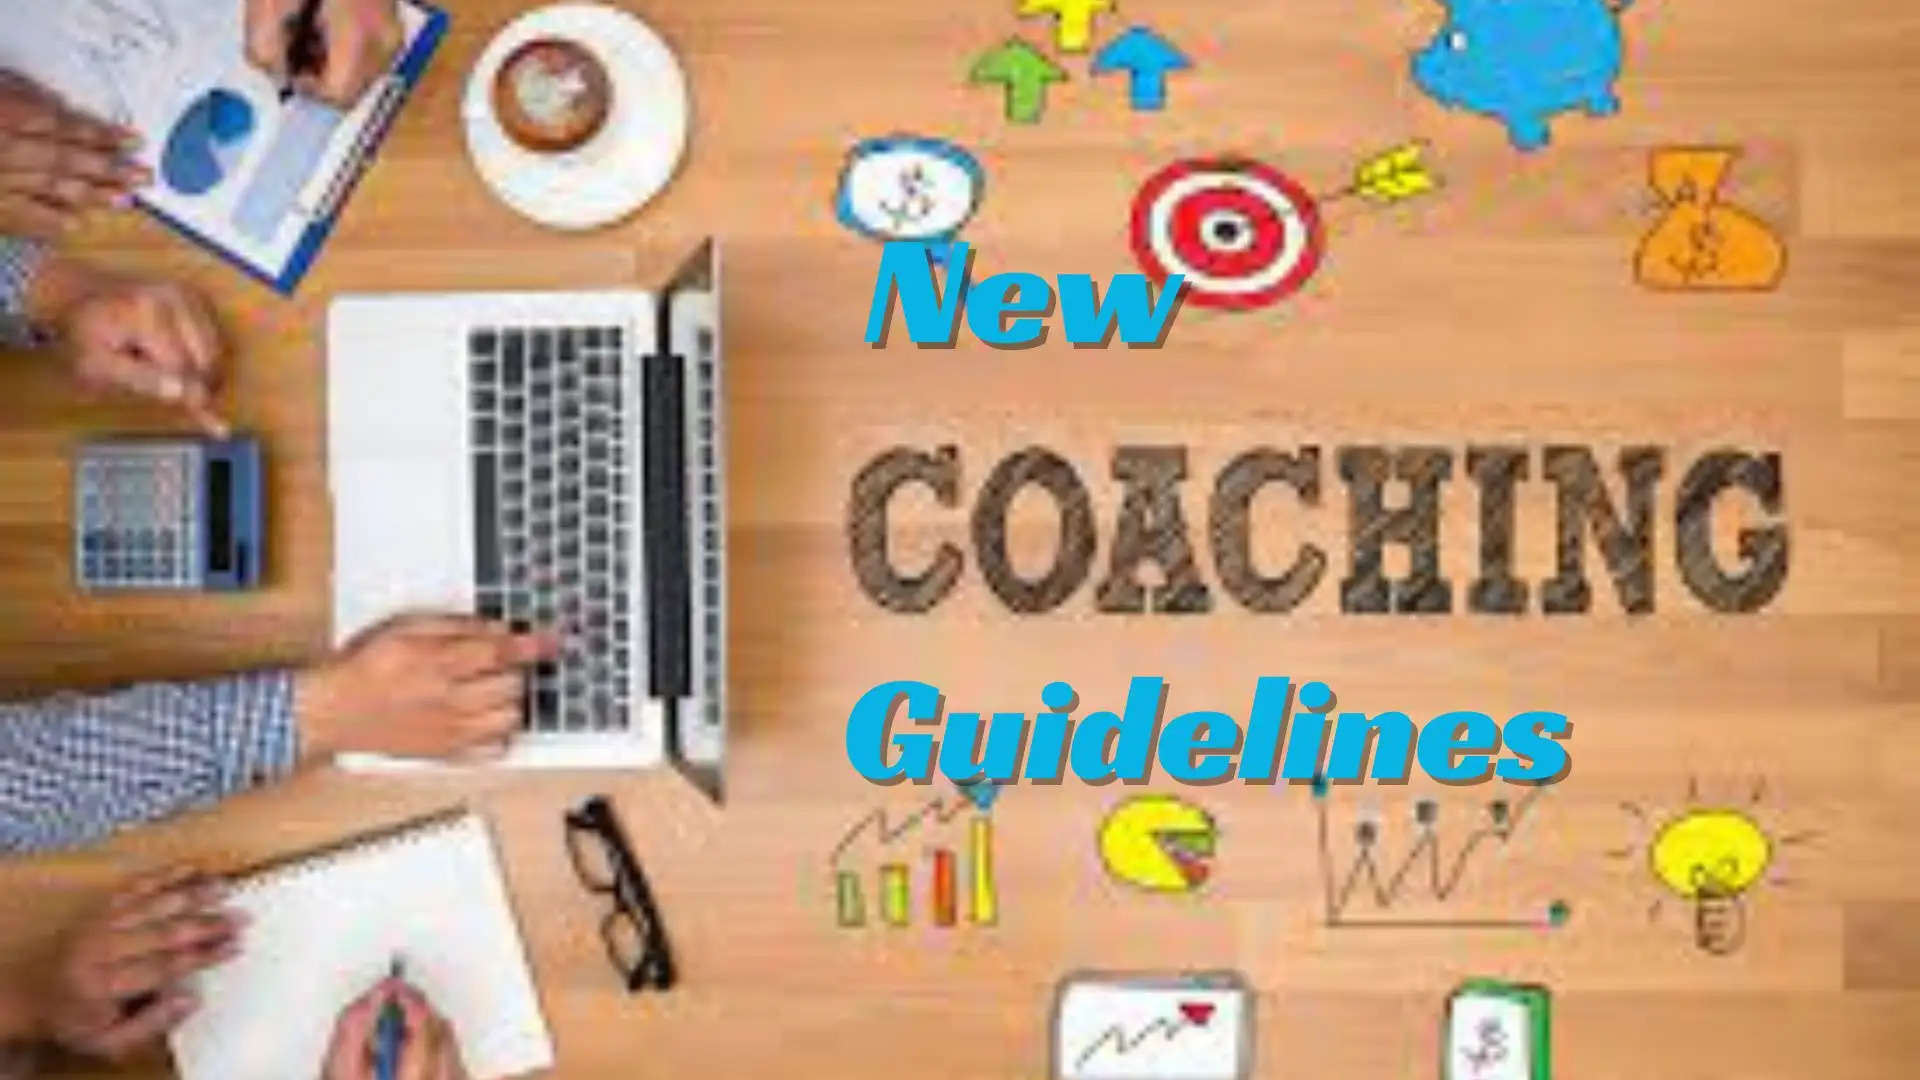 New Coaching Guidelines